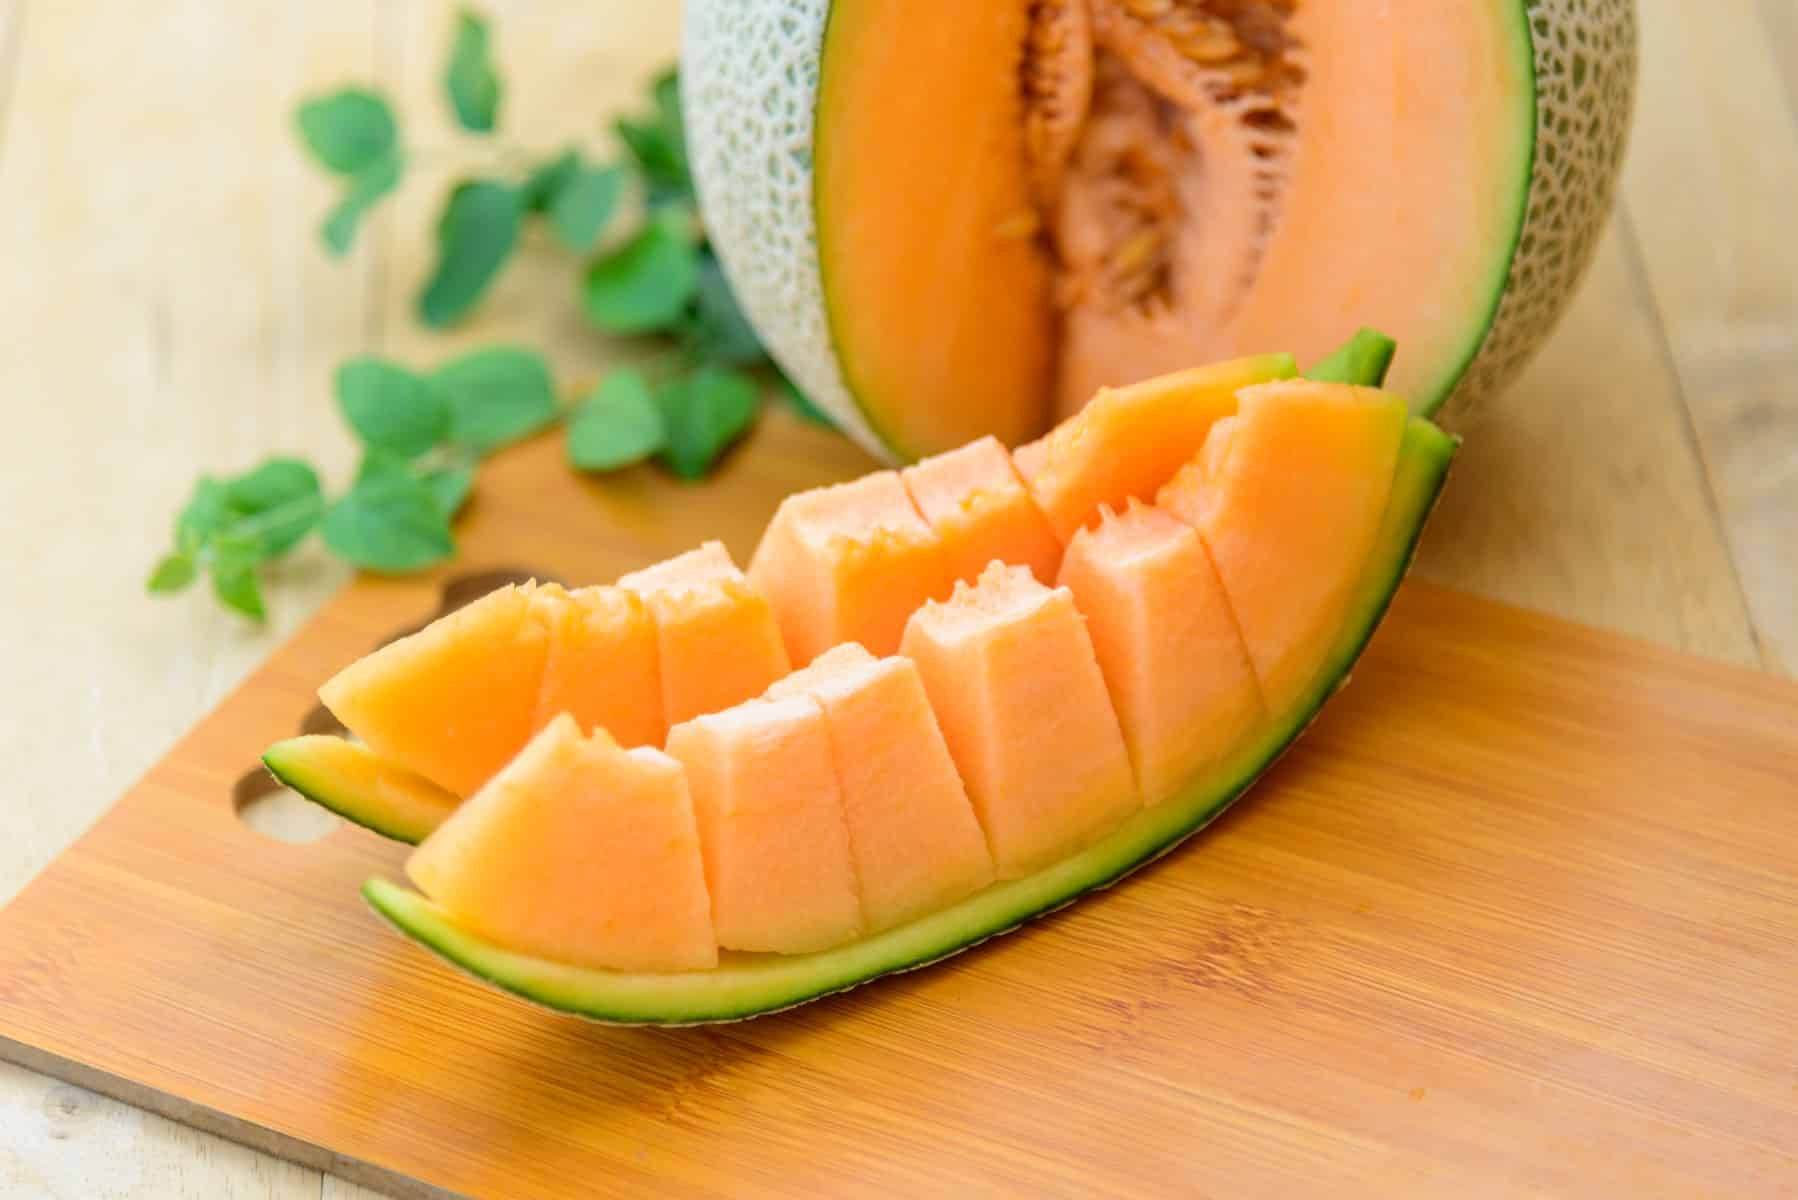 Sliced melon into cubes on the rind. 